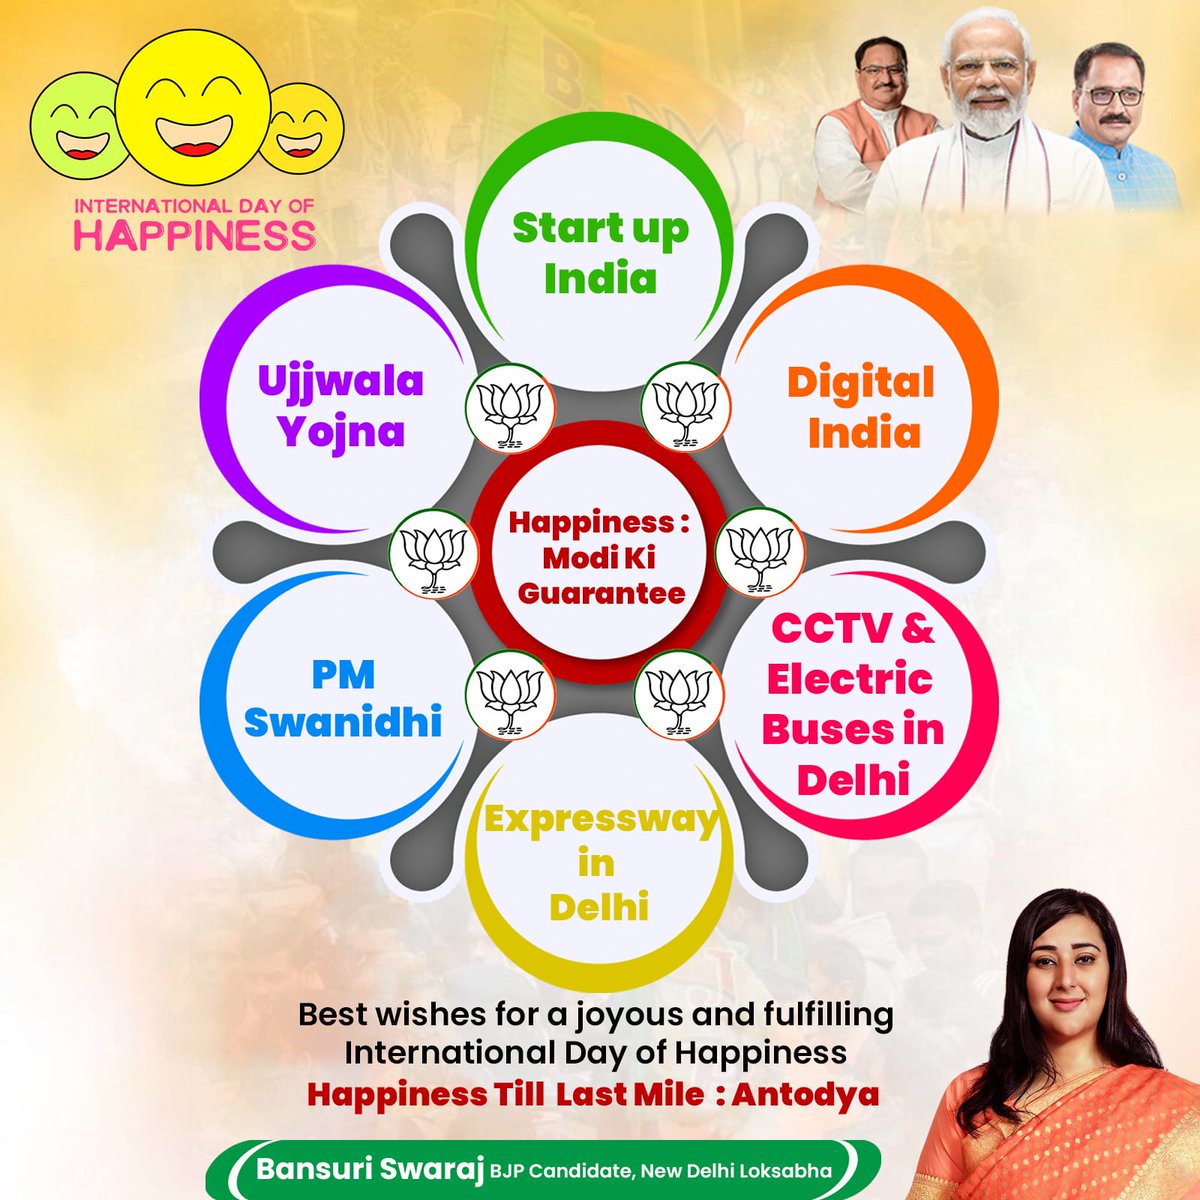 Best wishes to everyone on International day of Happiness.
Our mission is happiness till the last mile!

#ModiKiGuarantee
#InternationalDayOfHappiness #InternationalHappinessDay